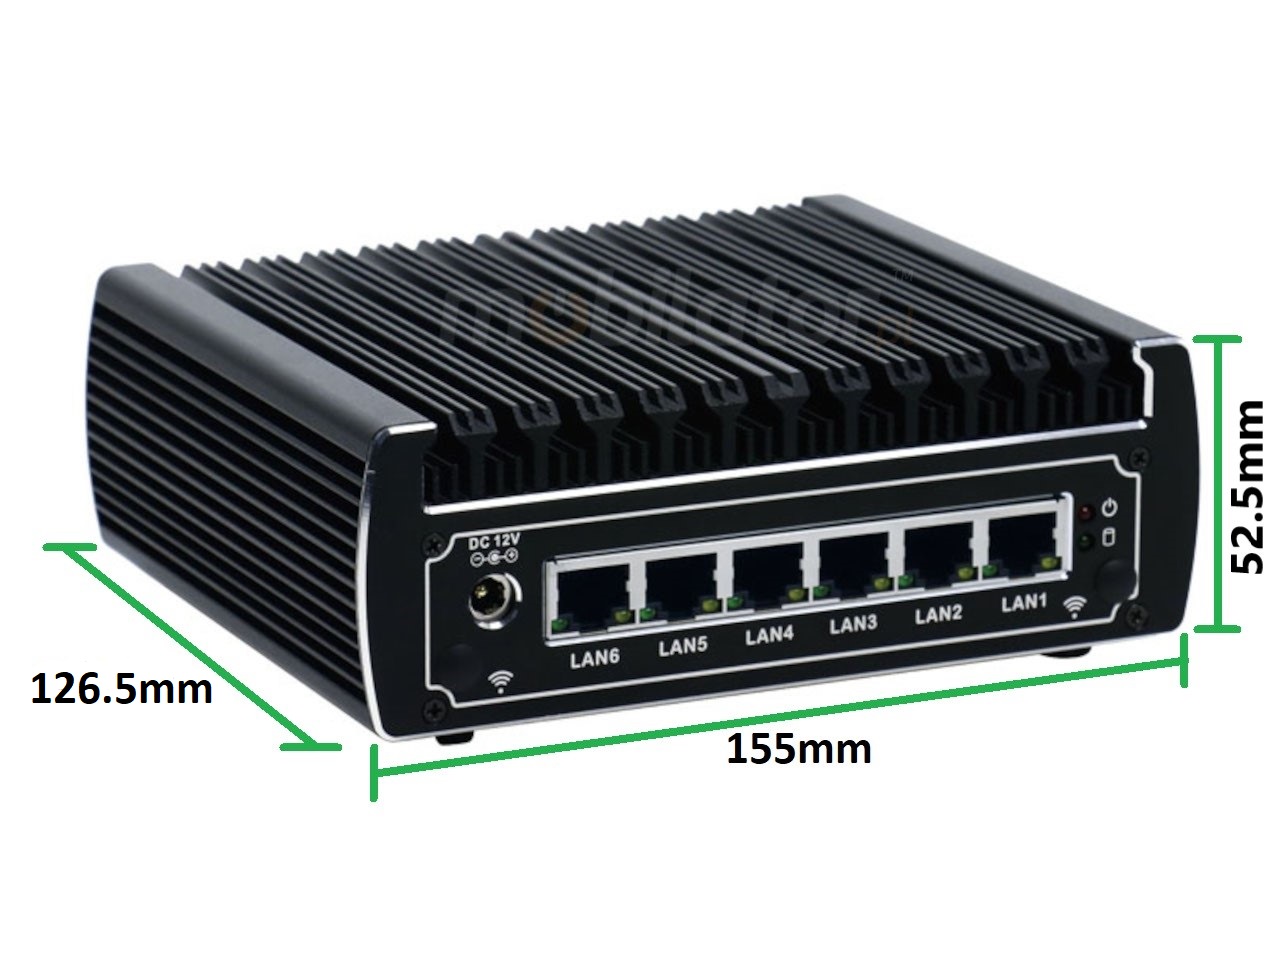  IBOX N133 v.15, size, industrial small fast reliable fanless industrial small LAN INTEL i3 SSD DDR4 WIFI BLUETOOTH